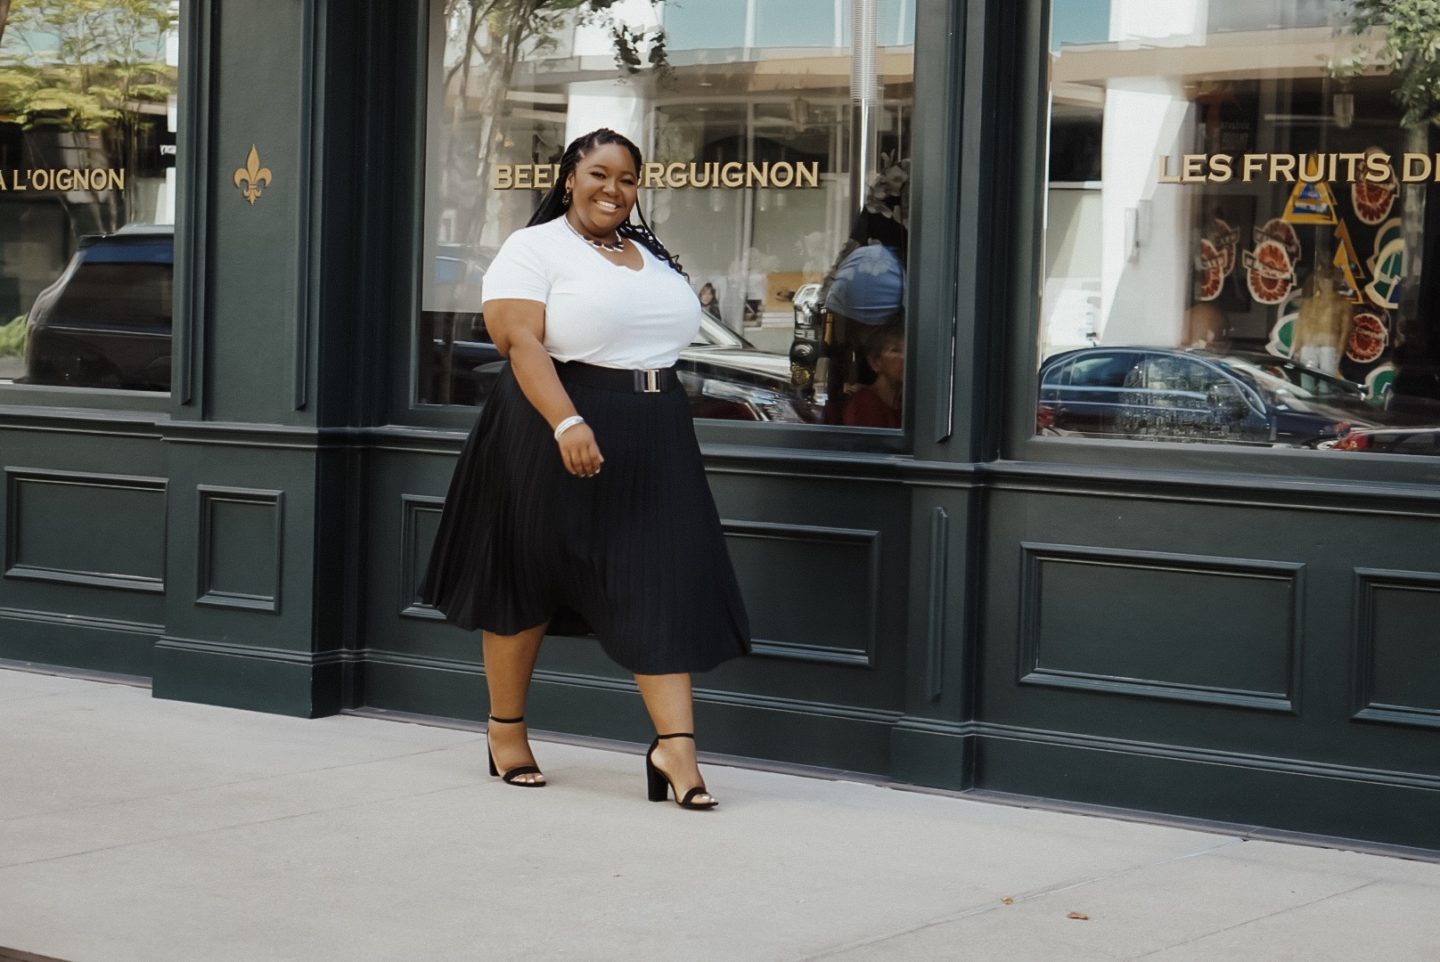 Plus Size Pleated Skirts! - From Head To Curve